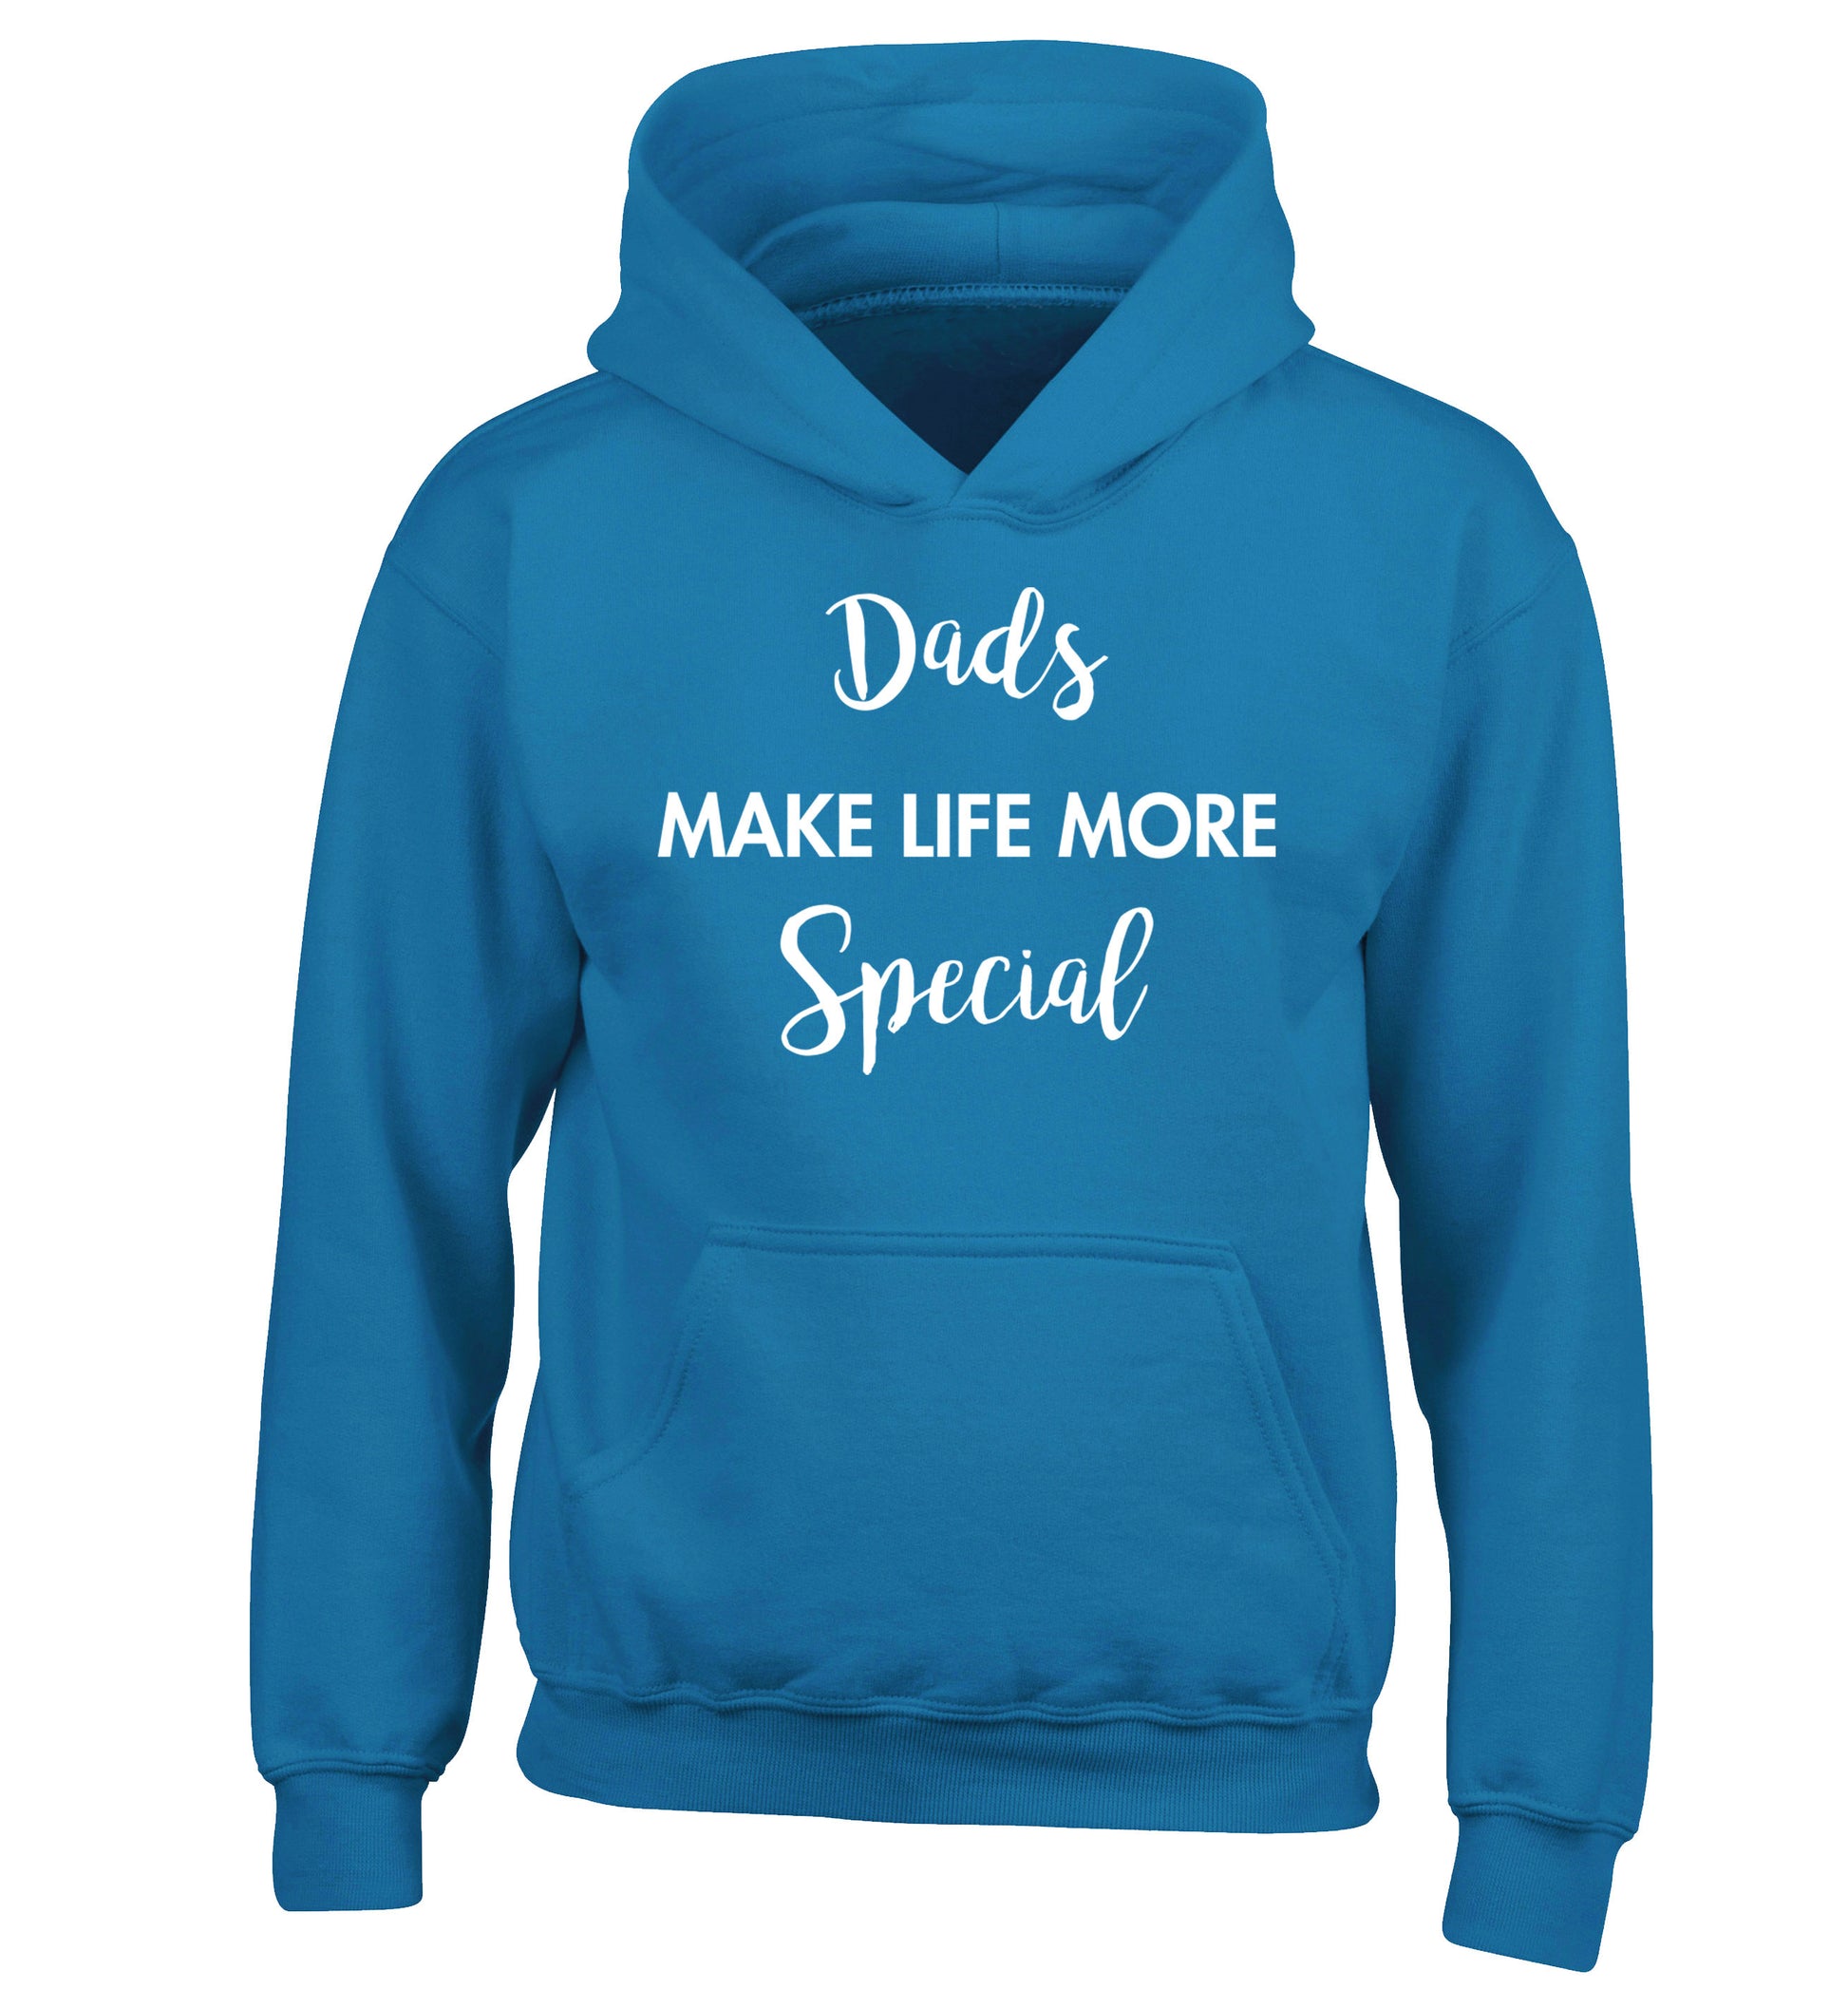 Dads make life more special children's blue hoodie 12-14 Years